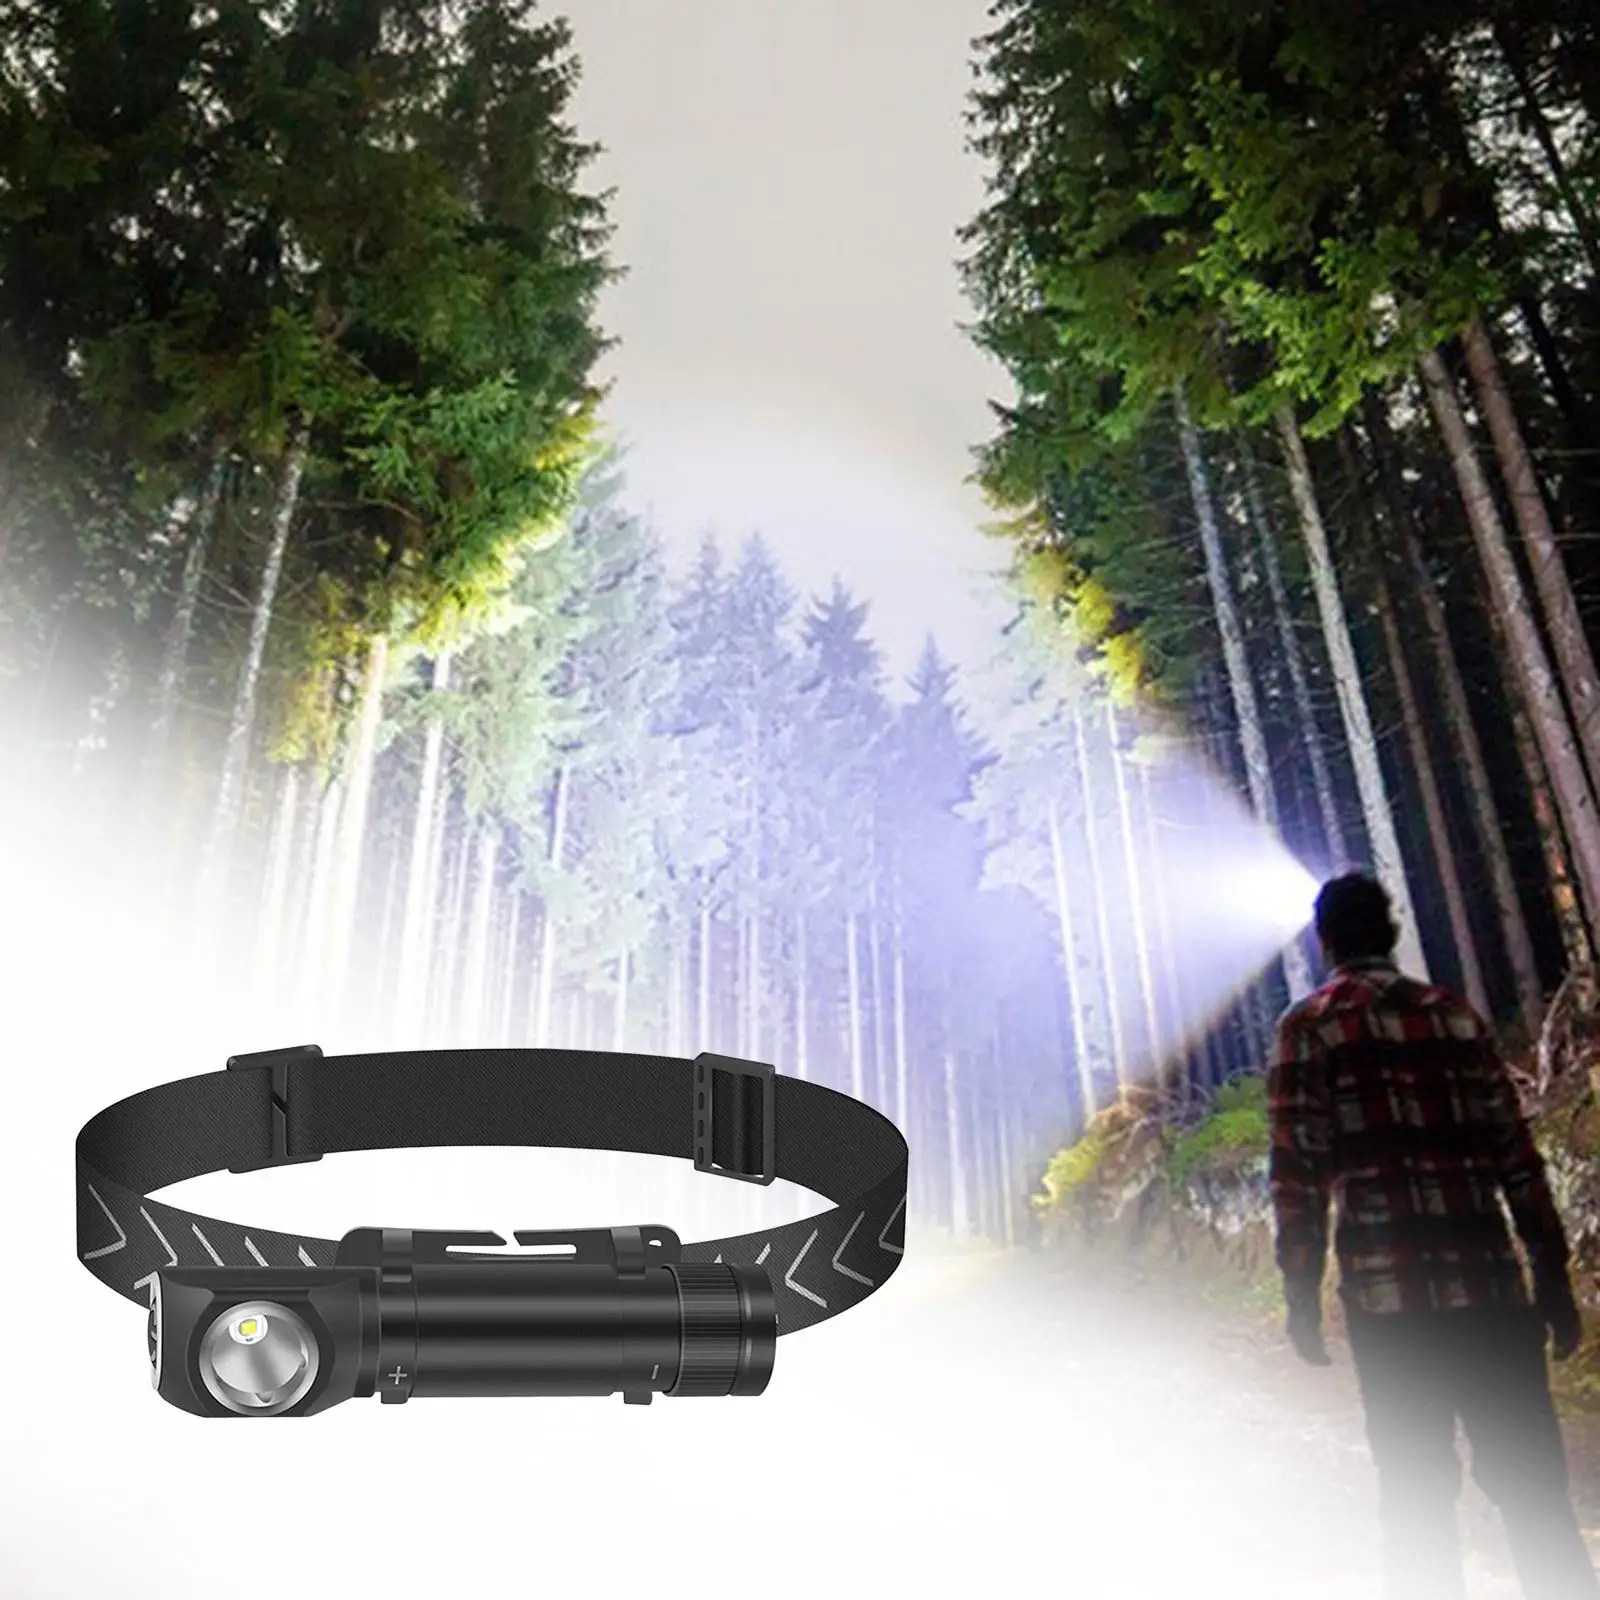 Portable Headlight Flashlight Night Working Light for Camp Backpacking